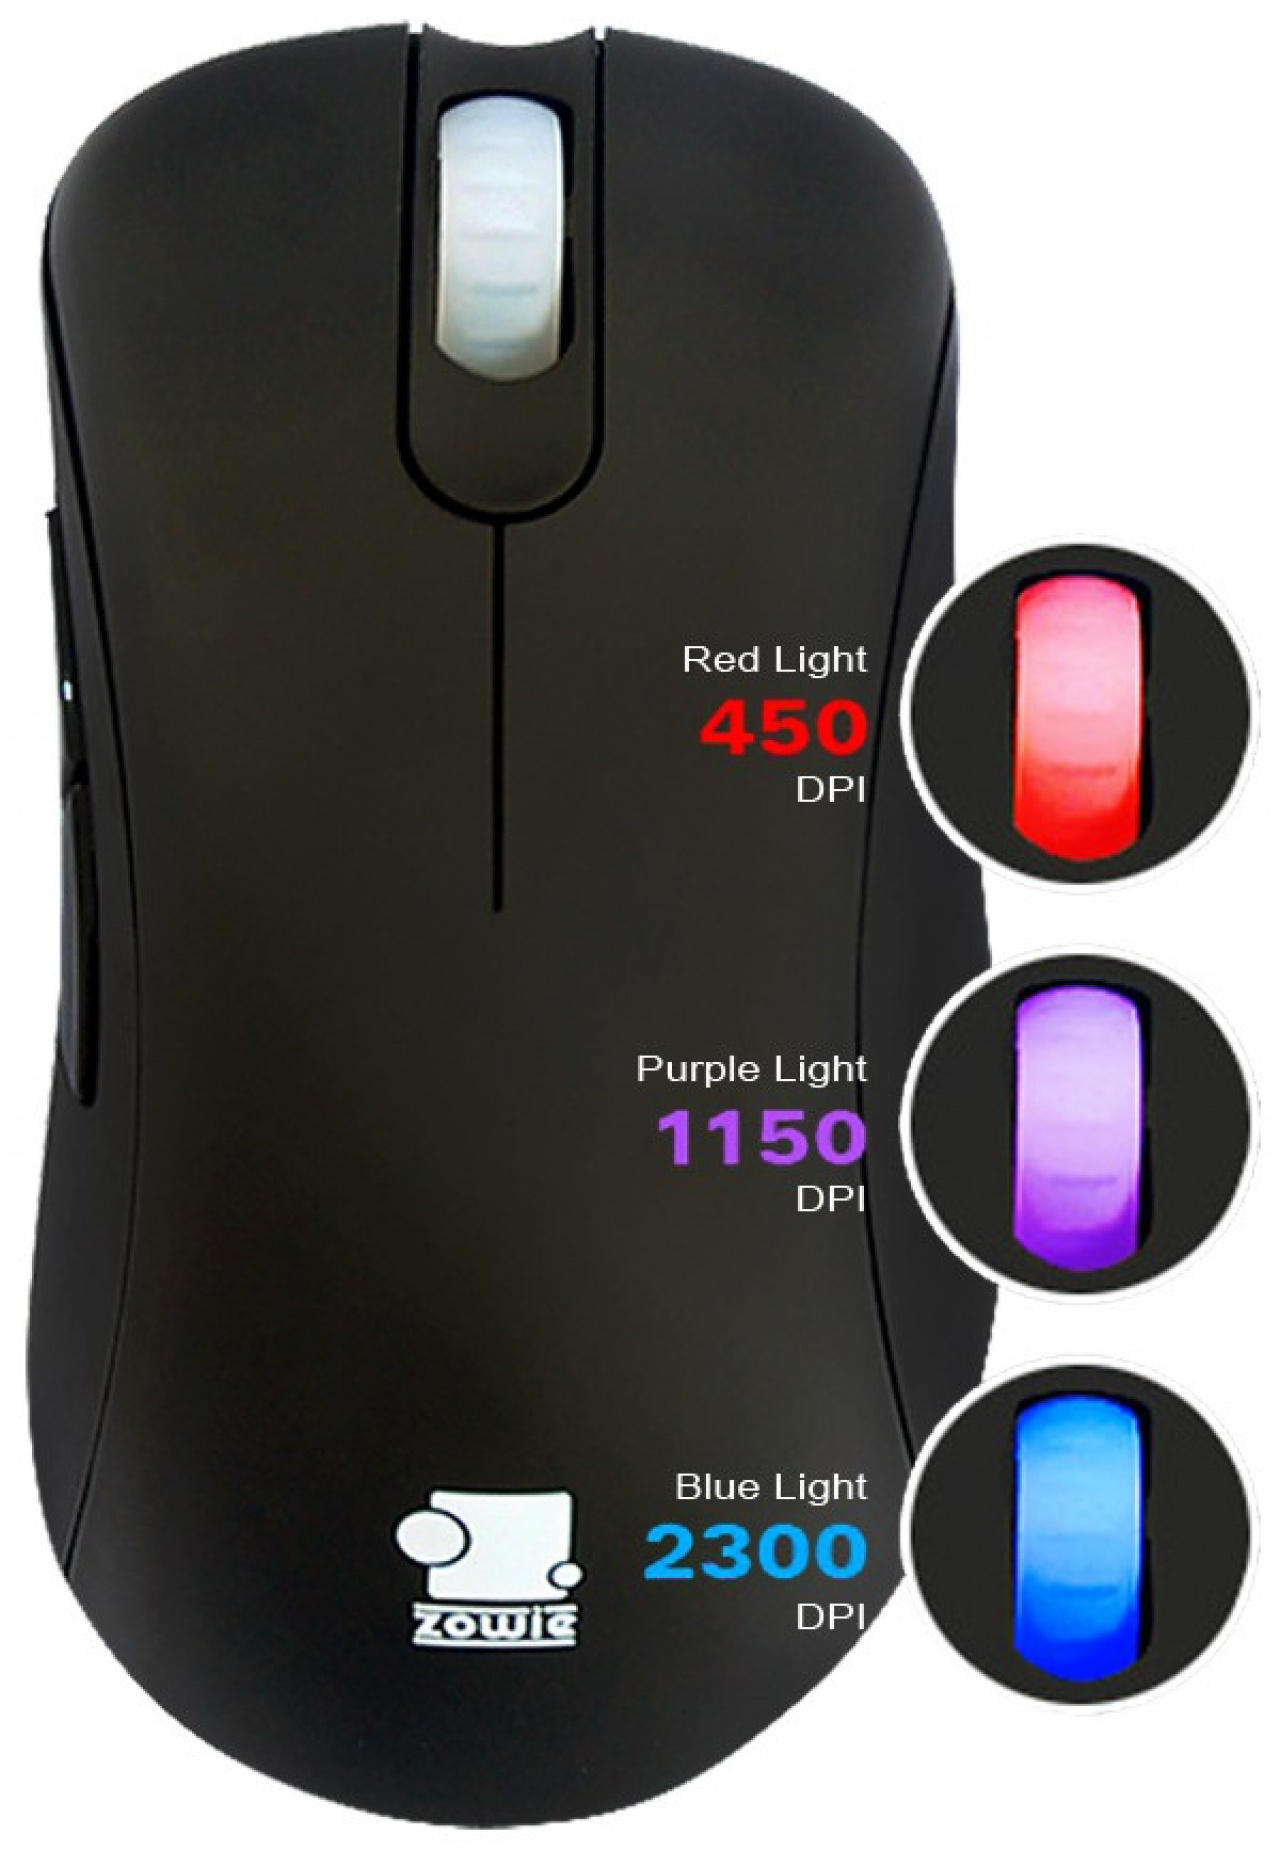 Zowie Ec2 Evo Gaming Mouse Reviews Hardware Tests Dlh Net The Gaming People